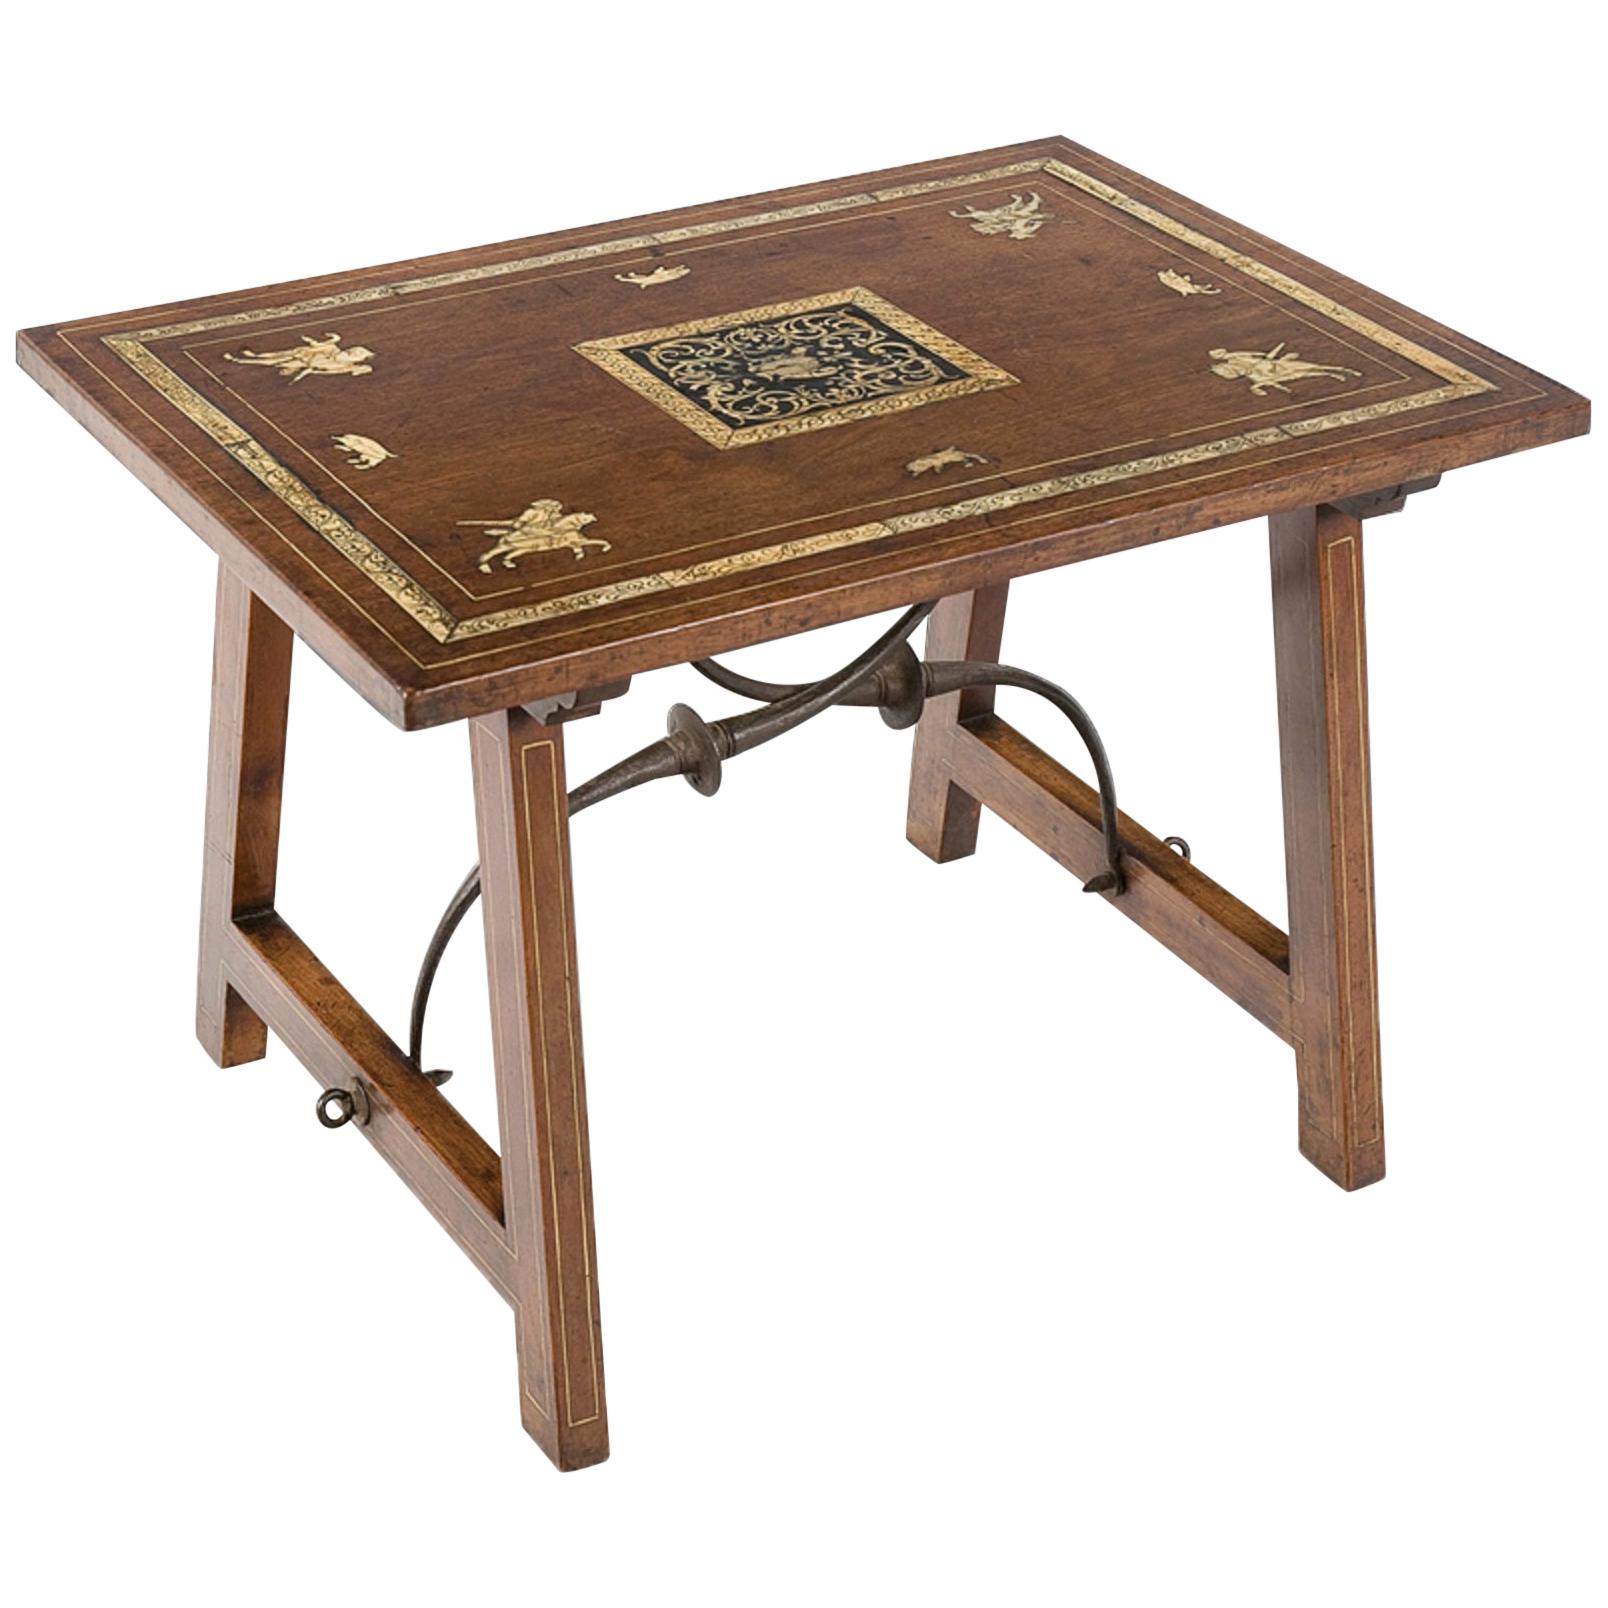 Walnut Table with Intarsia and Saint Anthony Legs, Spain, 18th Century